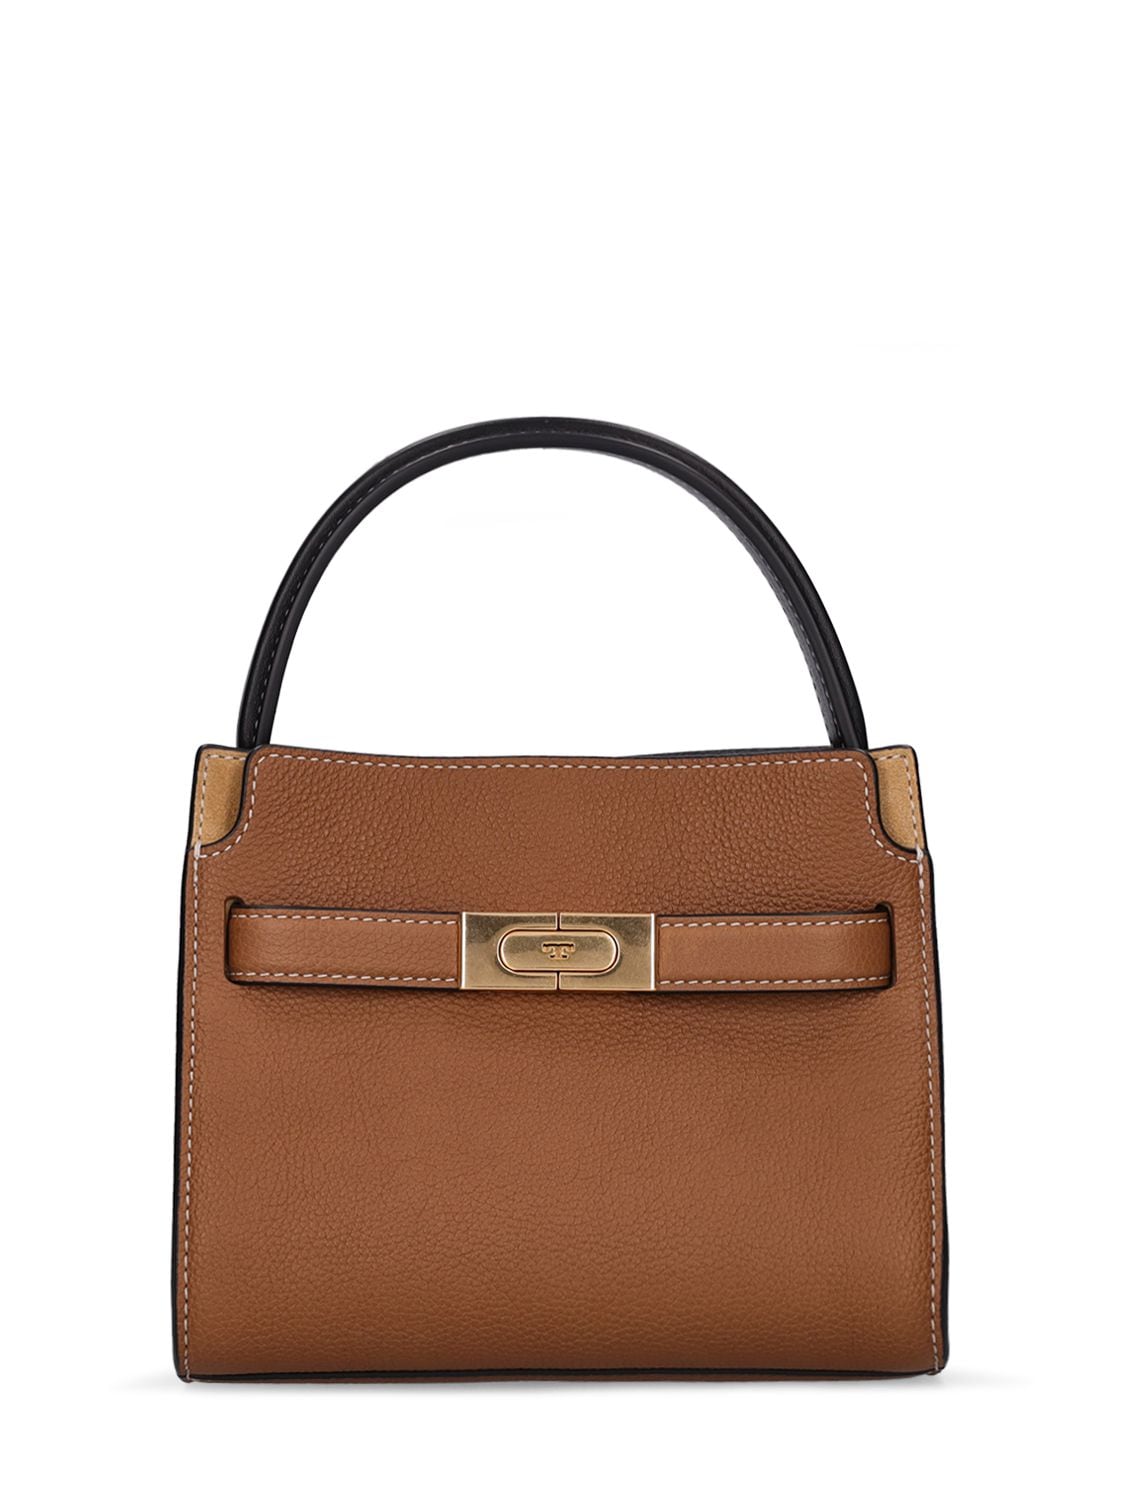 Image of Petite Double Lee Radziwill Pebbled Bag